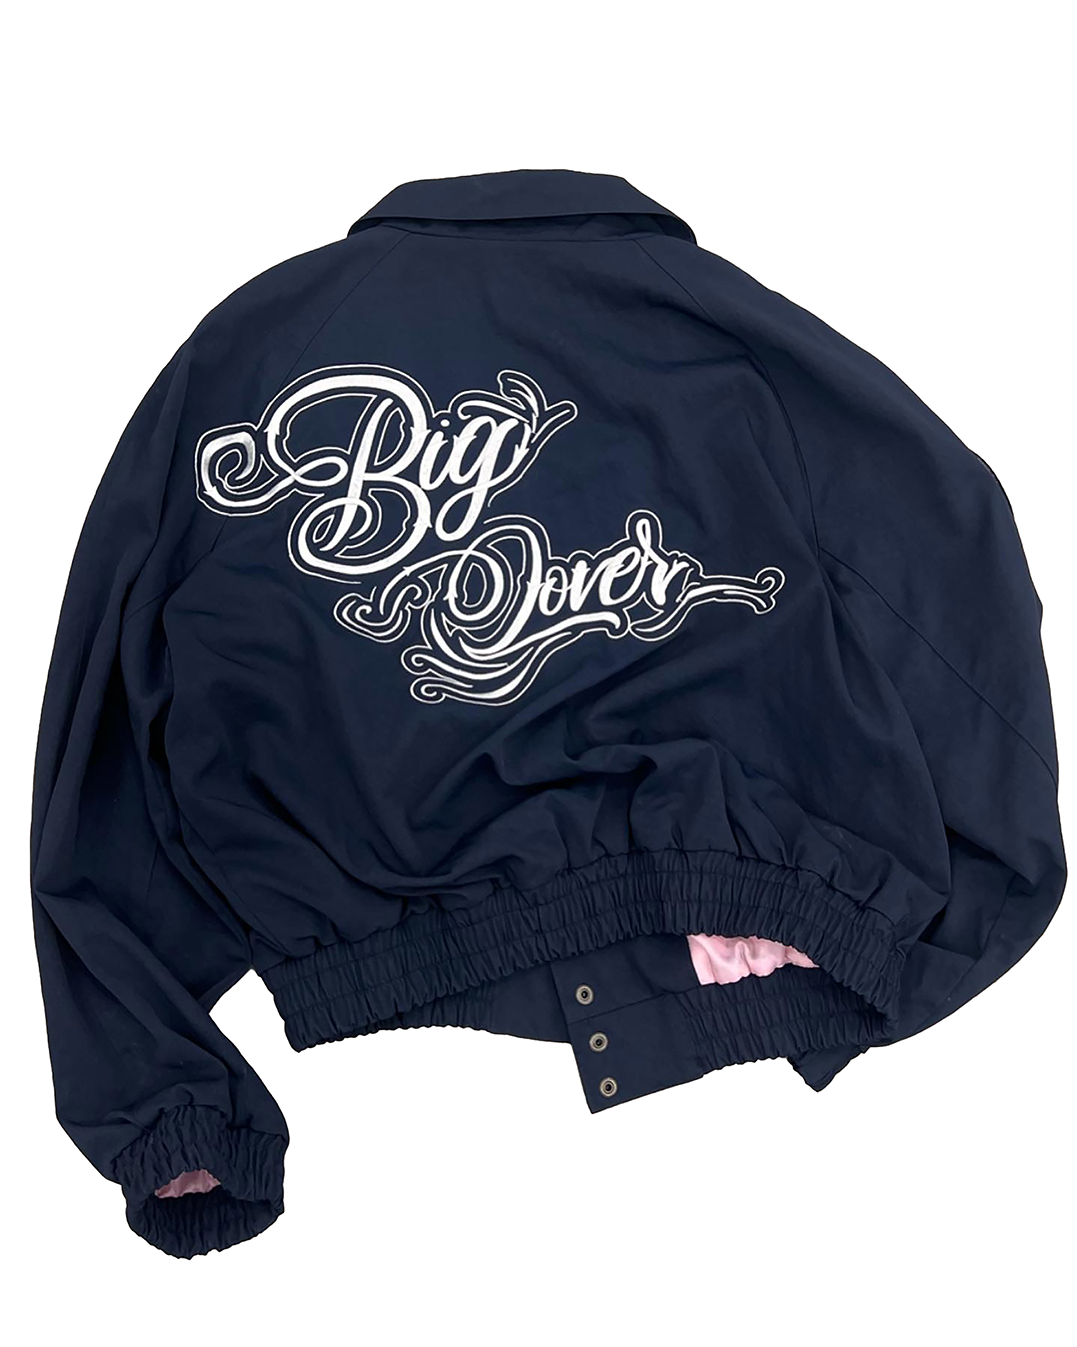 Big LoVER Embroidery Jacket : NAVY